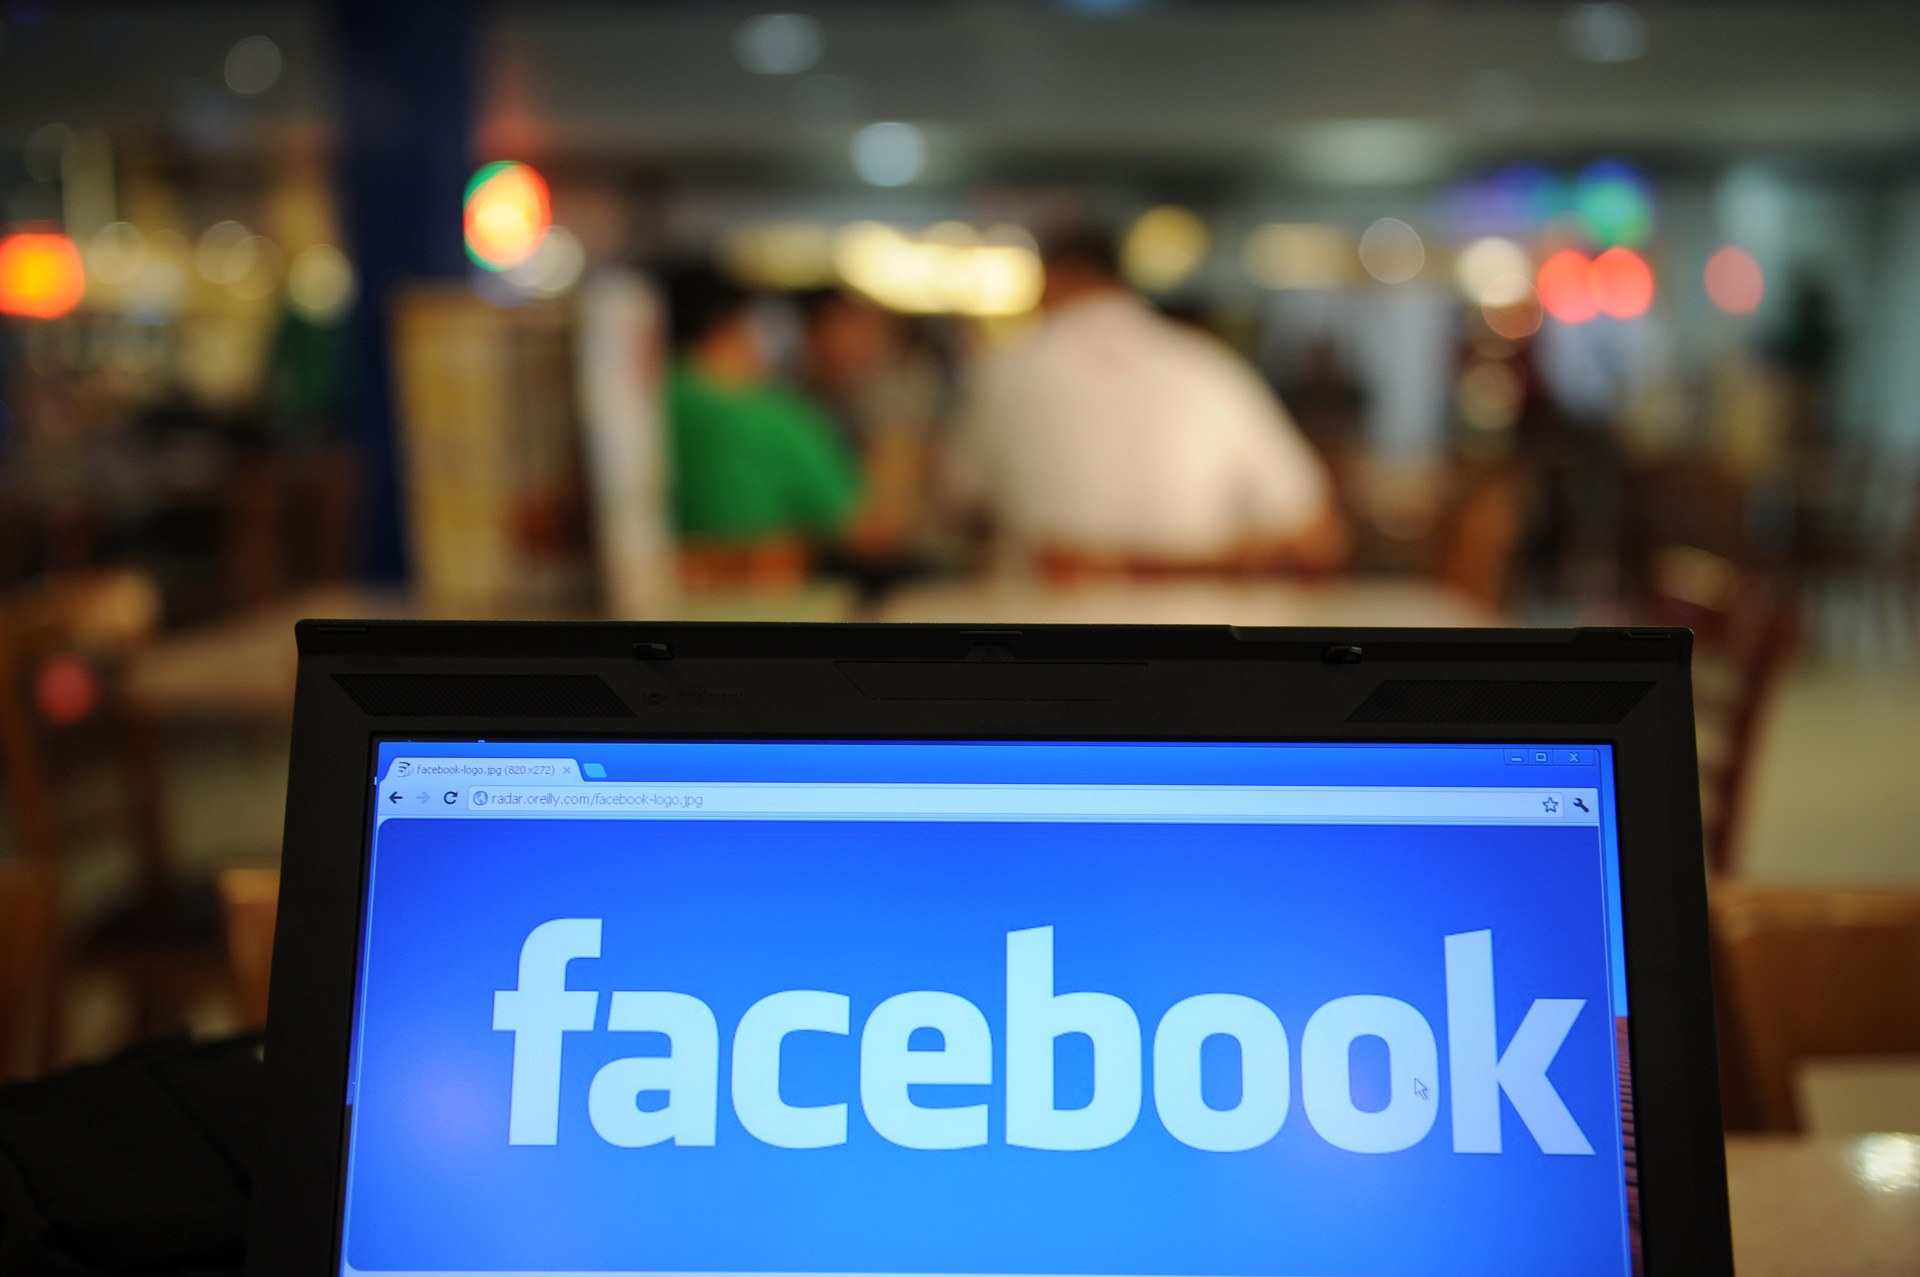 A computer tablet screen glows with a blue and white social media logo for the company Facebook. People are blurred in the background at a cafe setting.